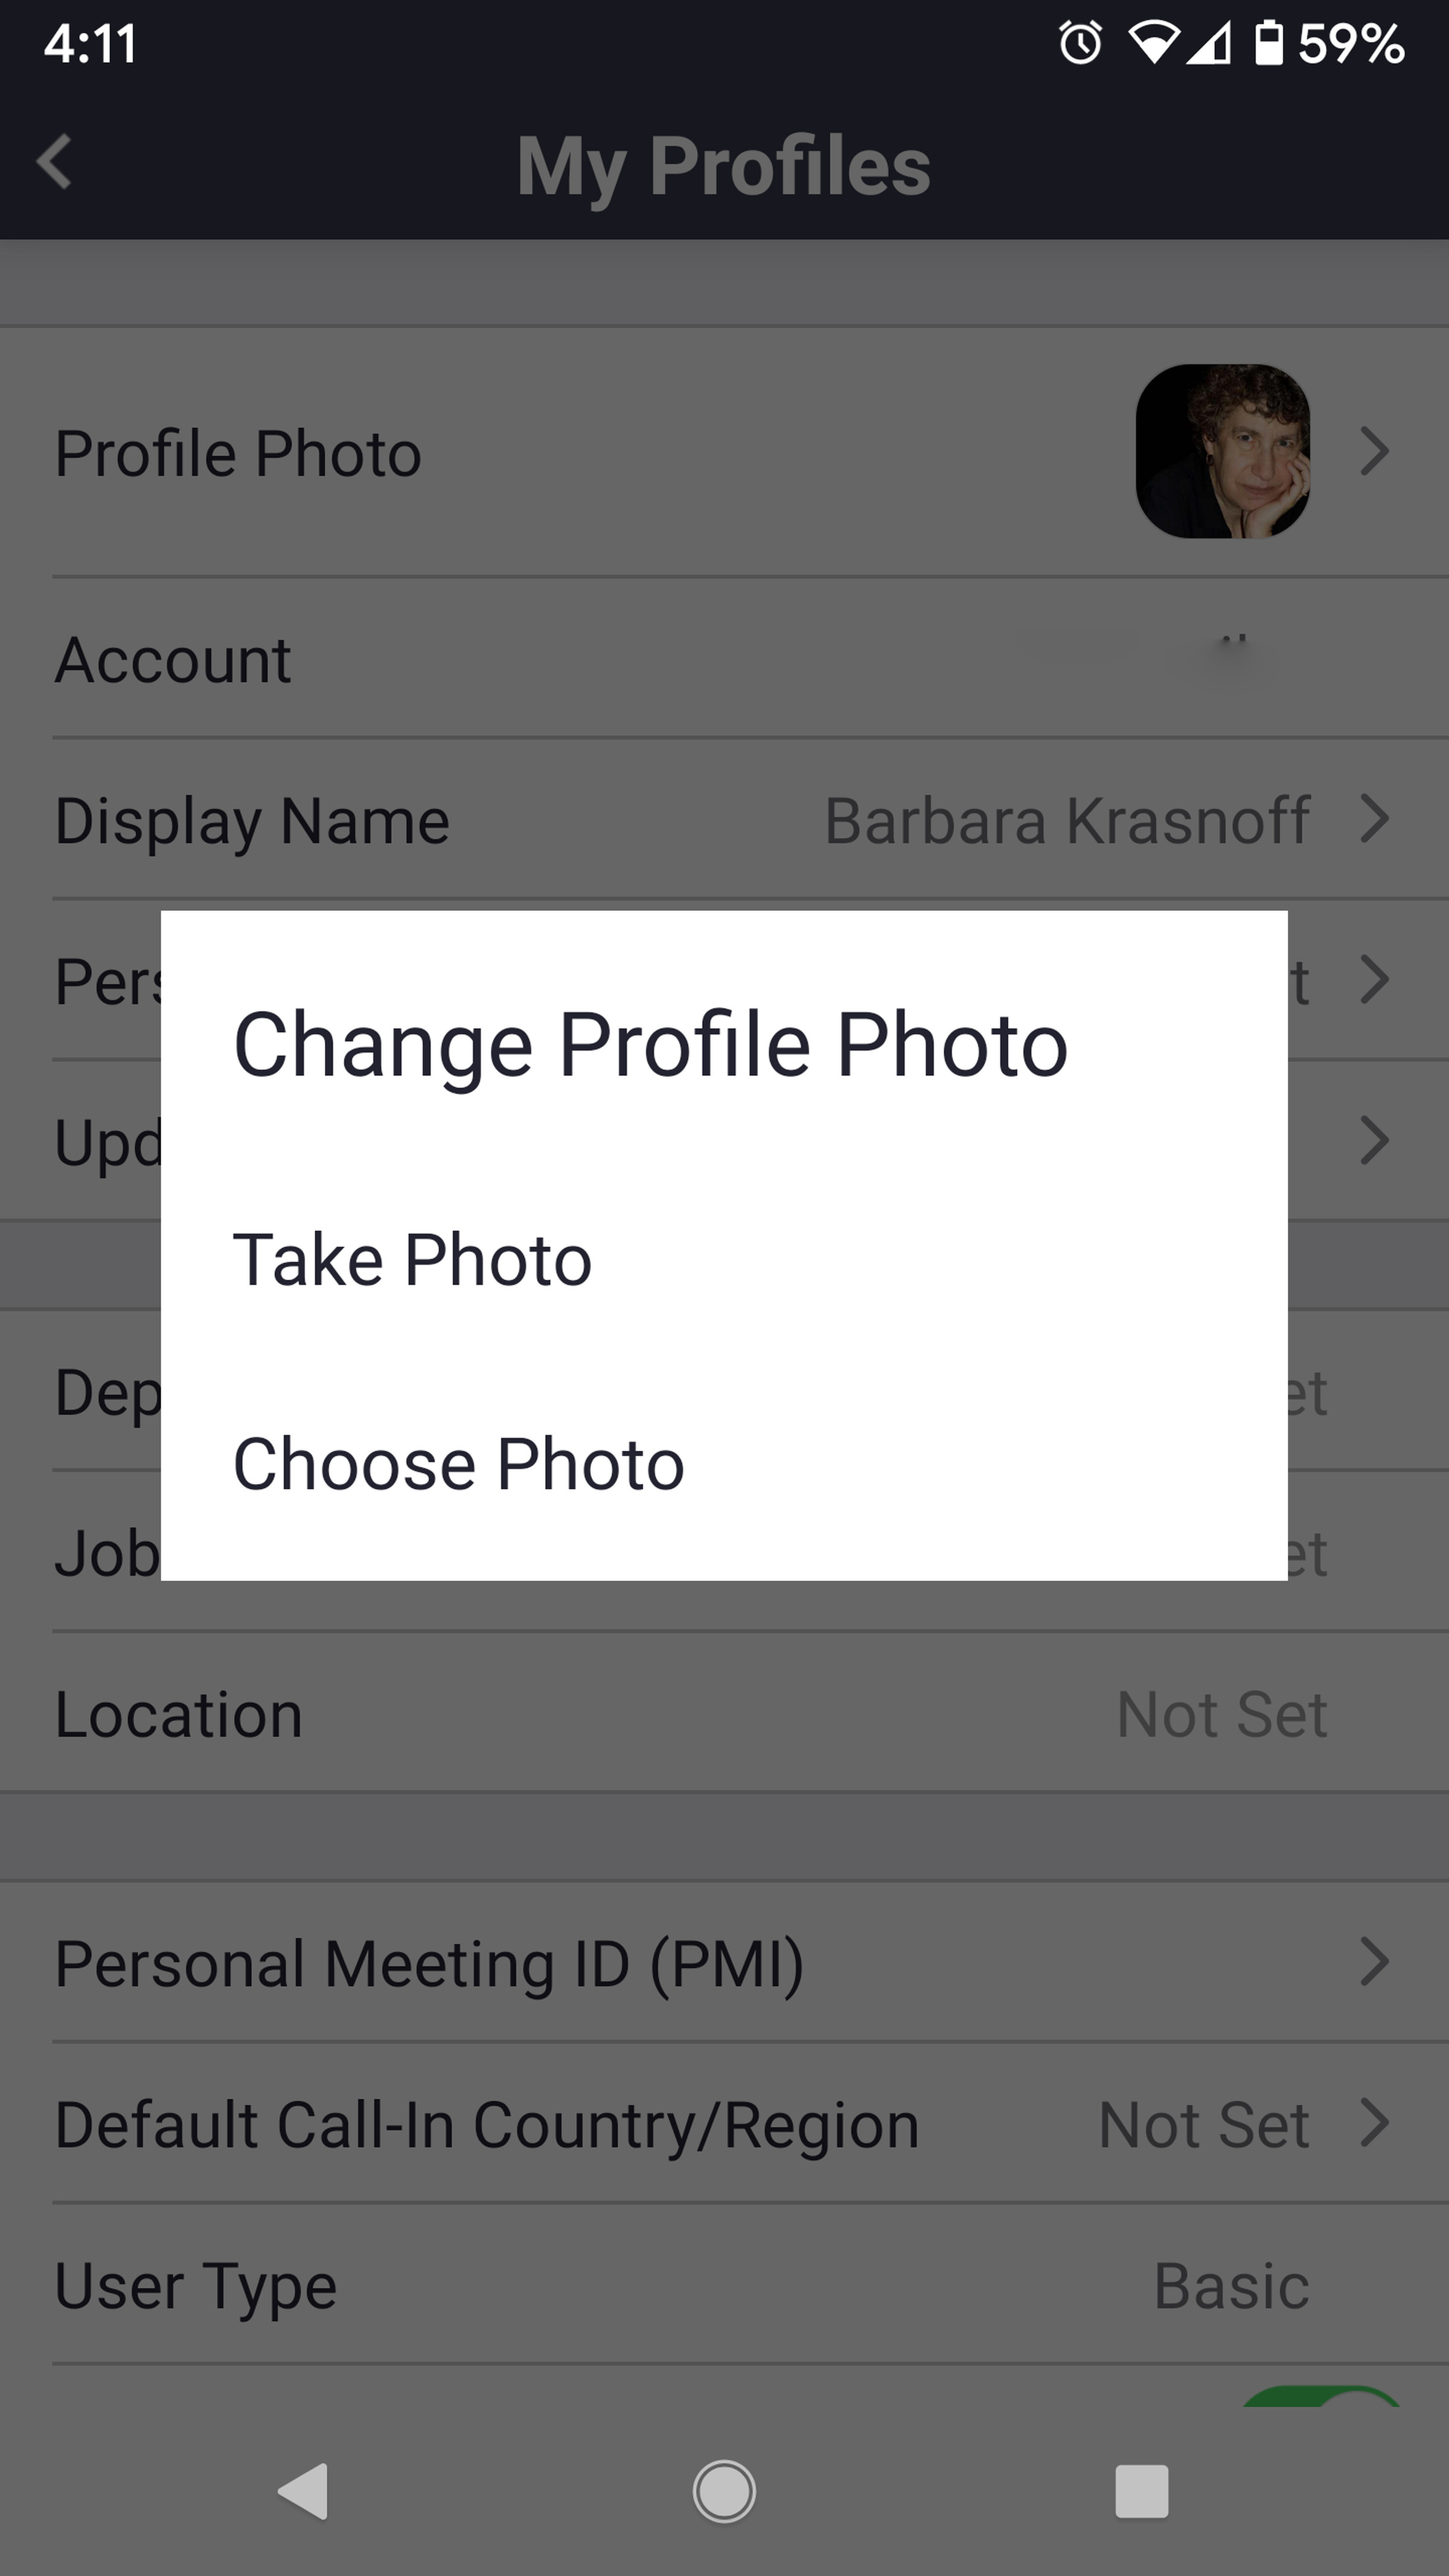 You can also change your profile photo in the pop-up window.